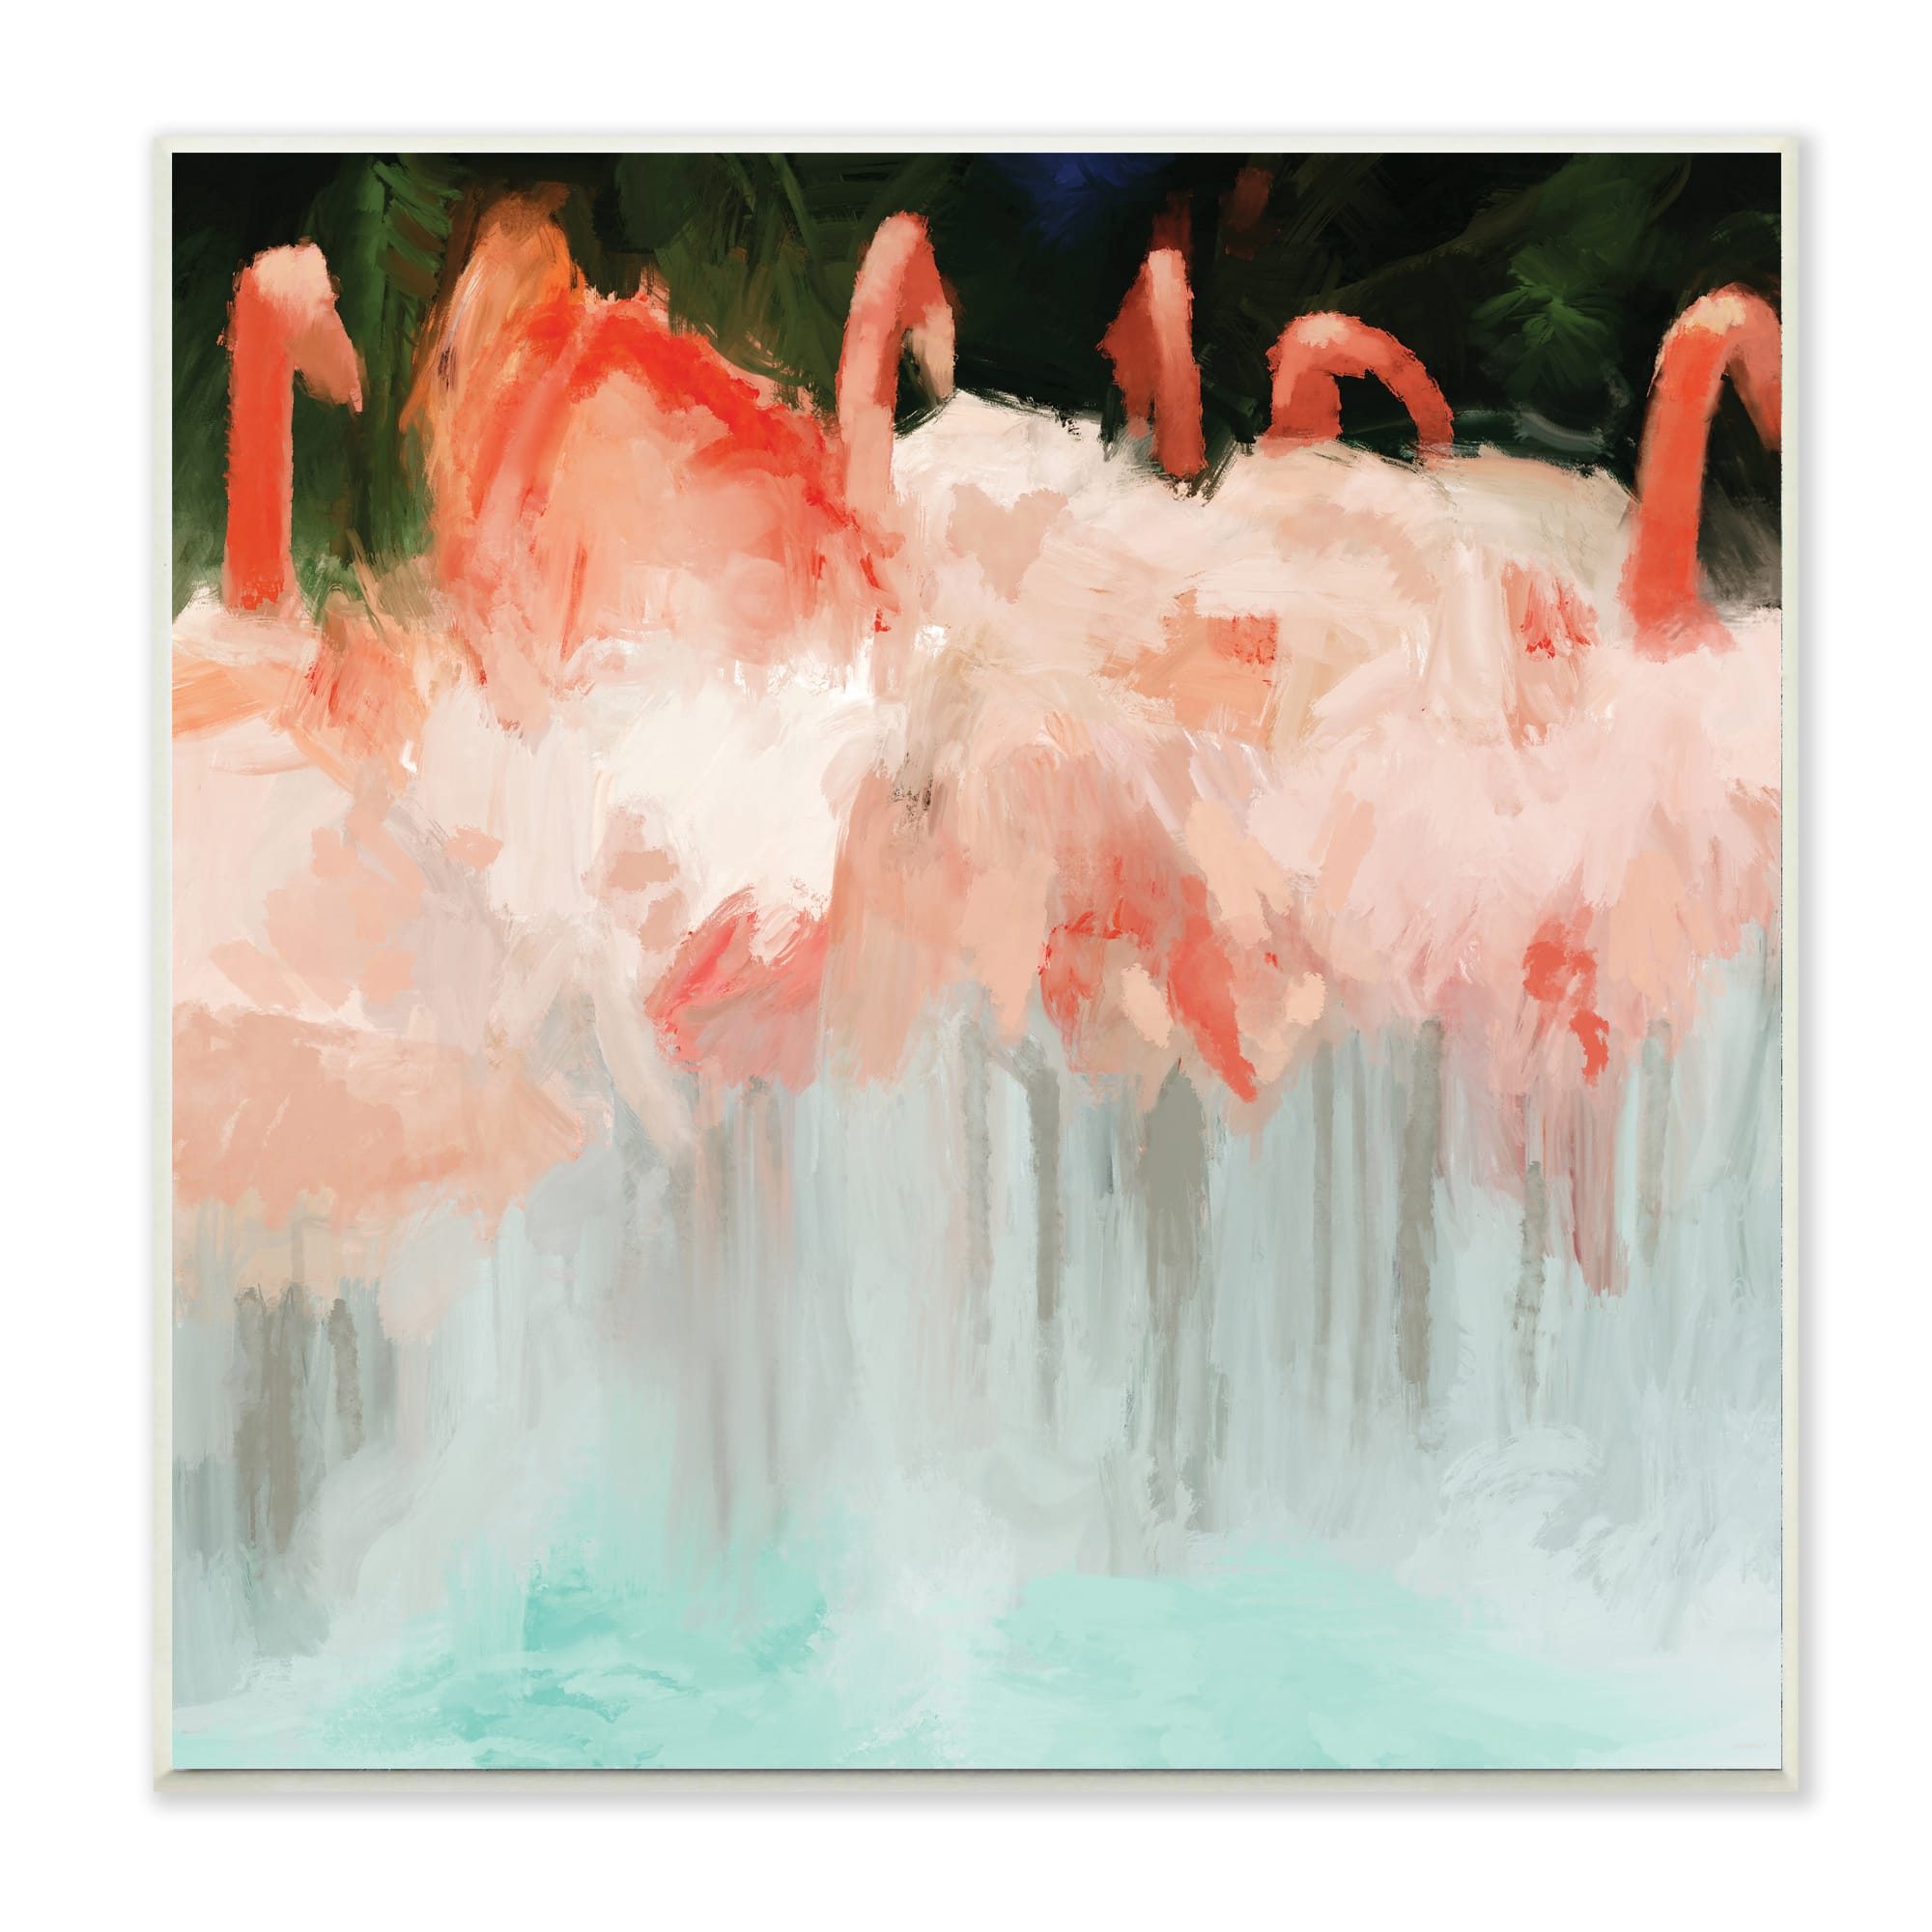 Flamingos Art Print, Made in the USA